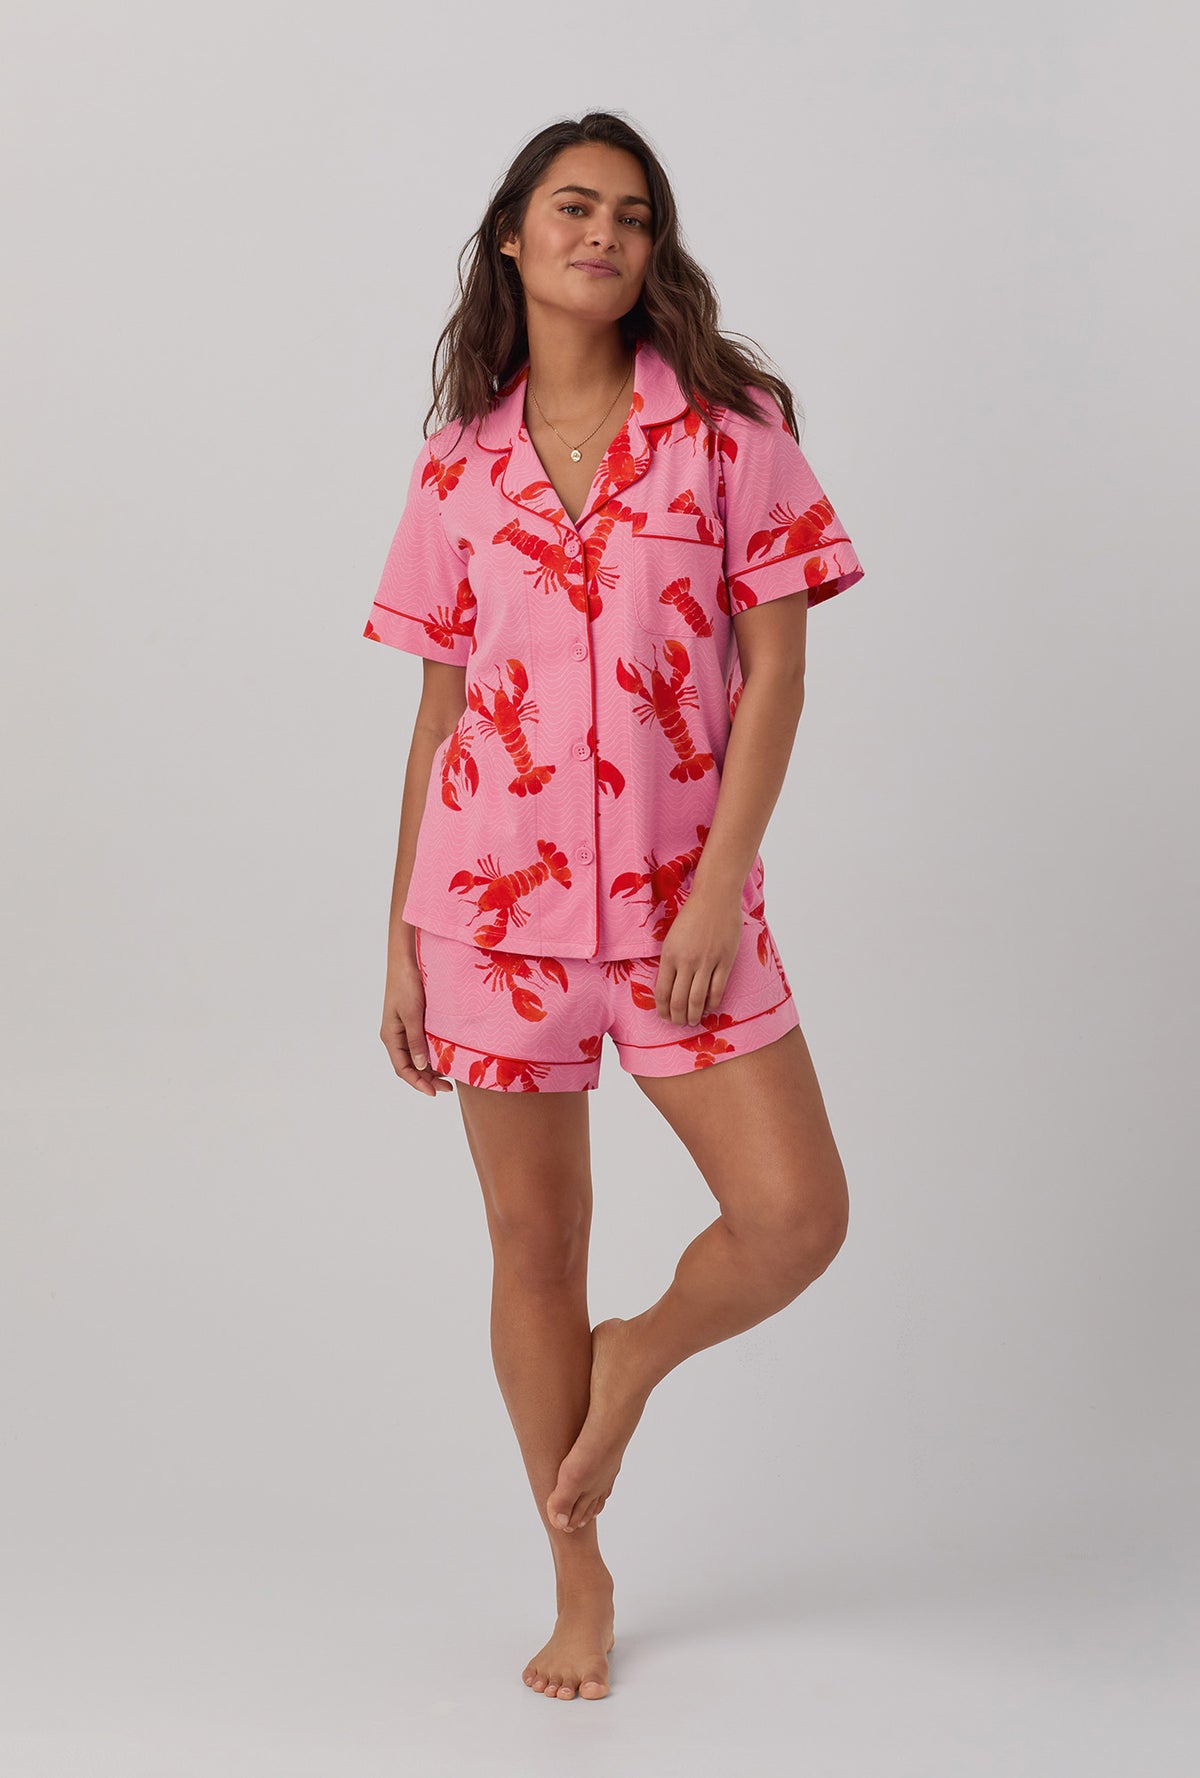 A lady wearing  pink  Short Sleeve Classic Shorty Stretch Jersey PJ Set with Lobster Fest print.